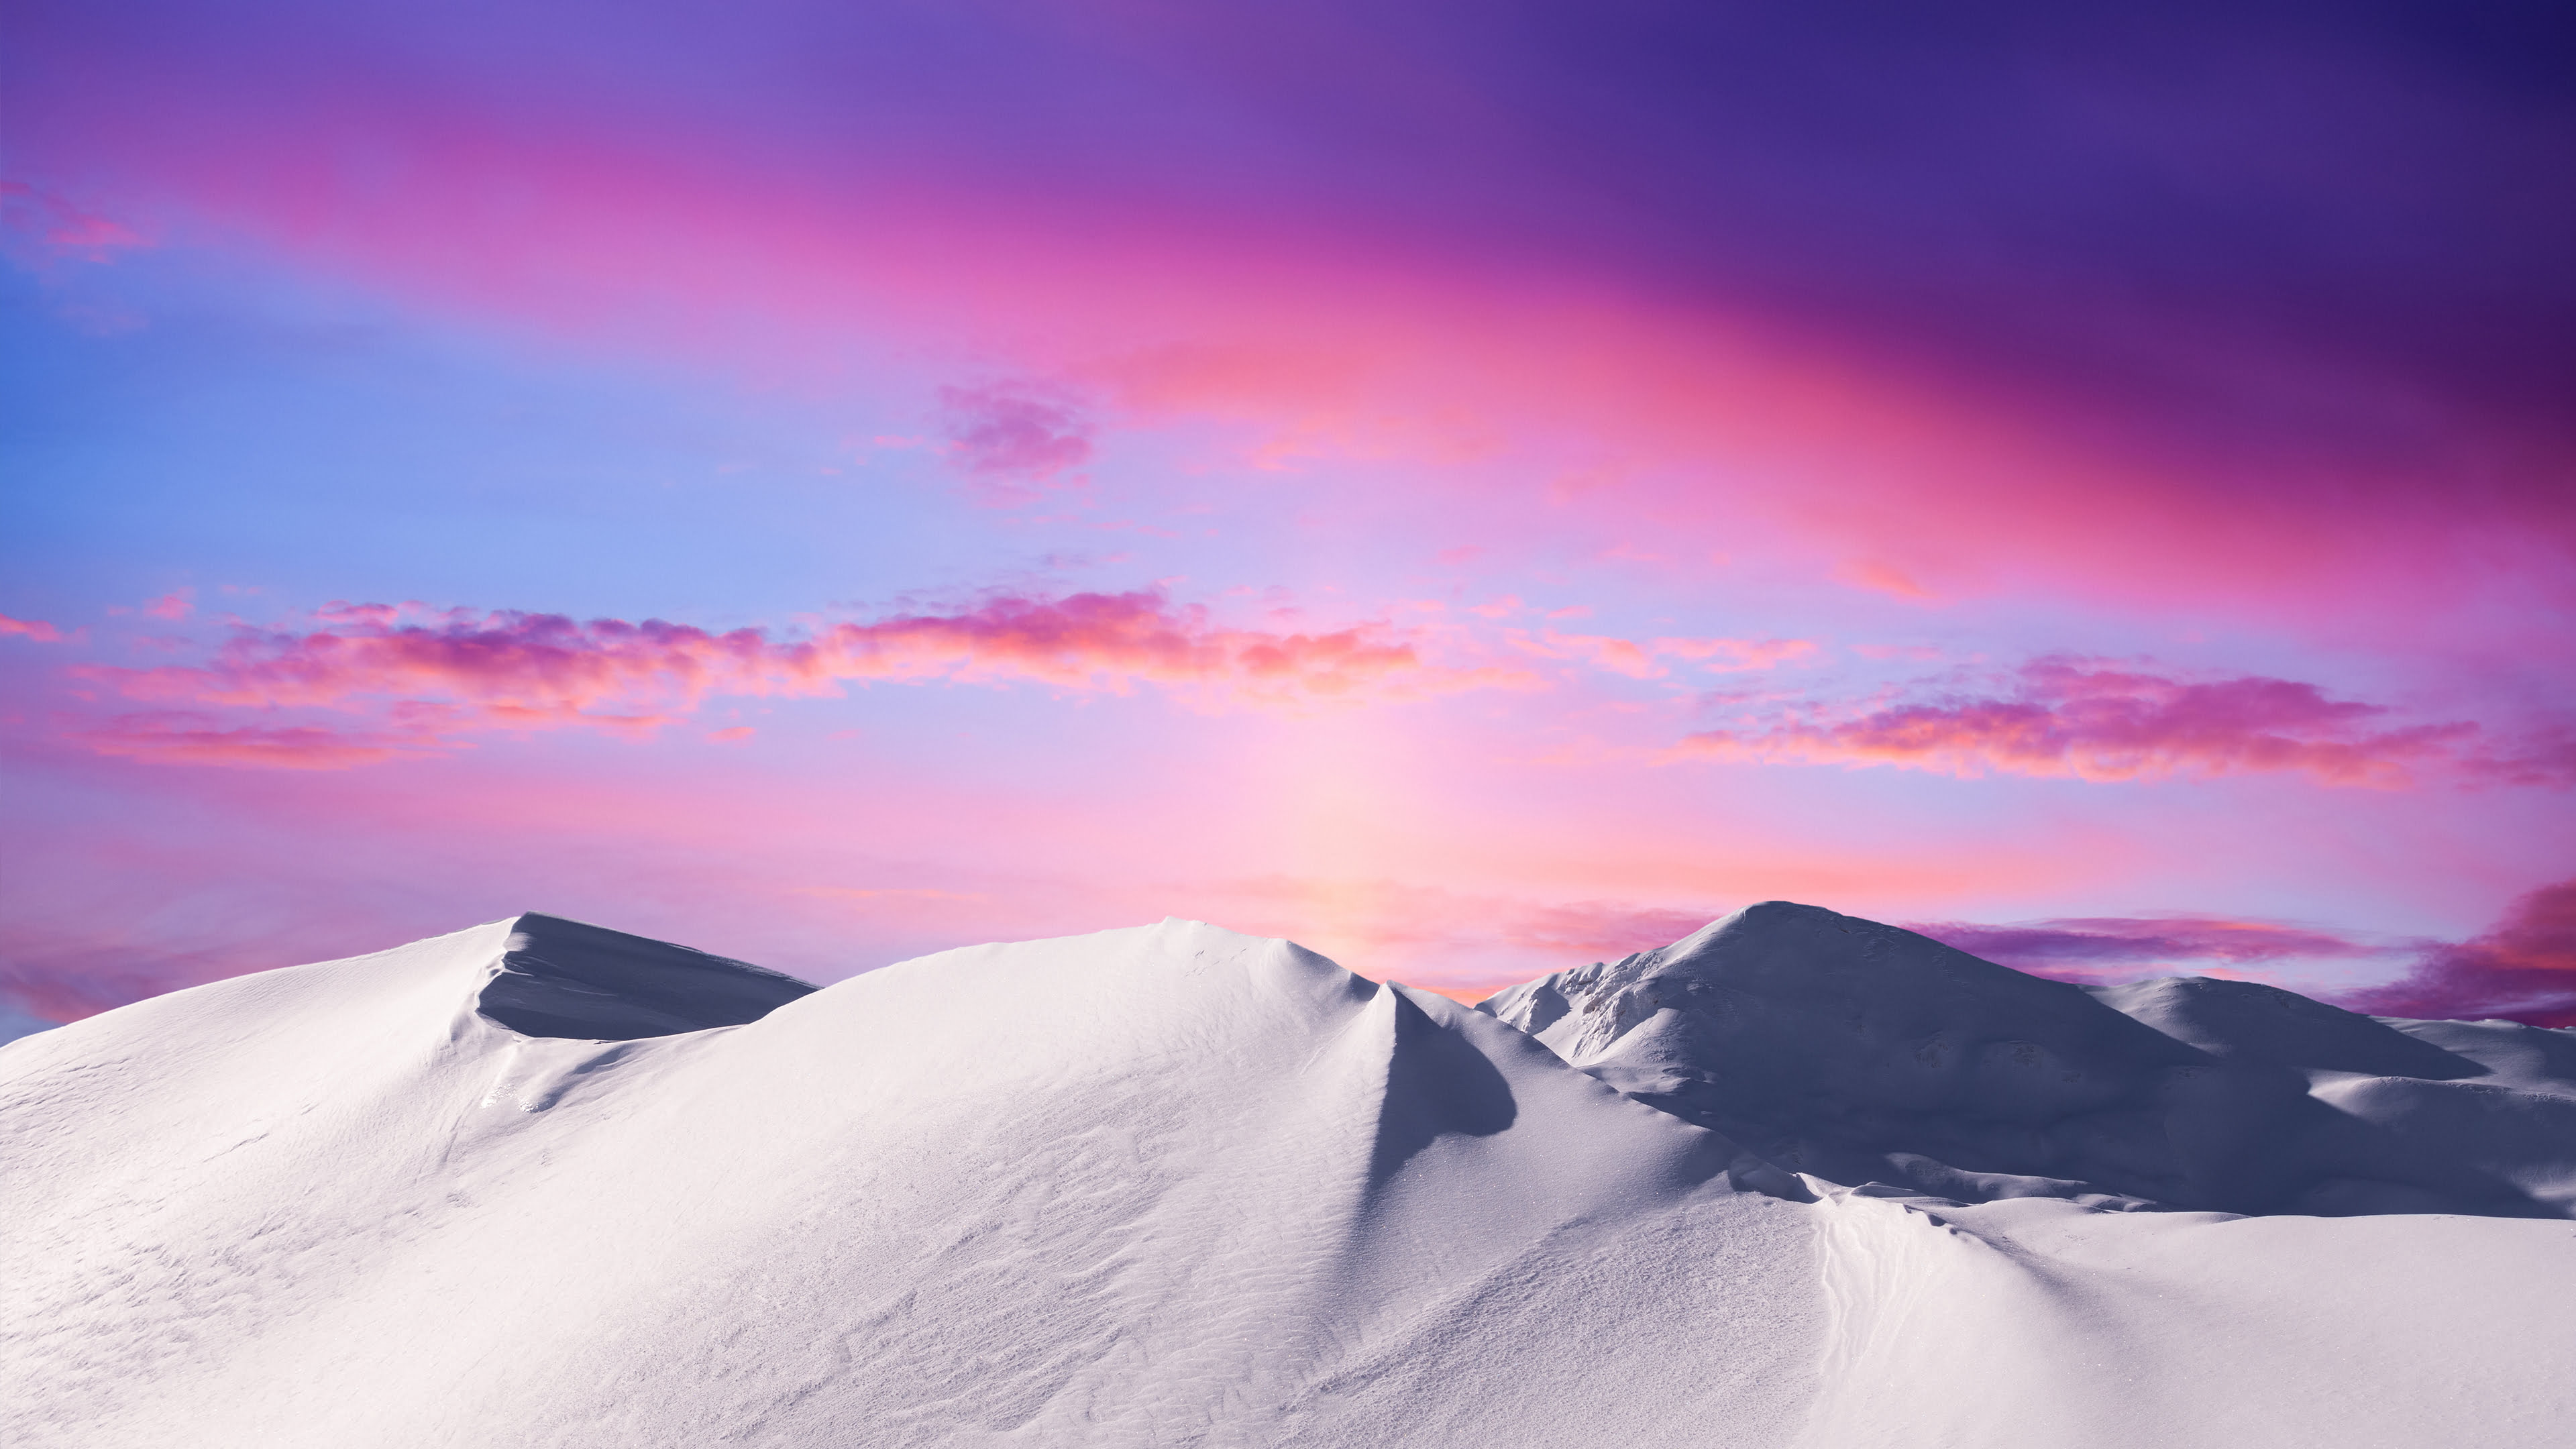 https://www.pixground.com/snow-covered-mountains-4k-wallpaper/?download-img=4k